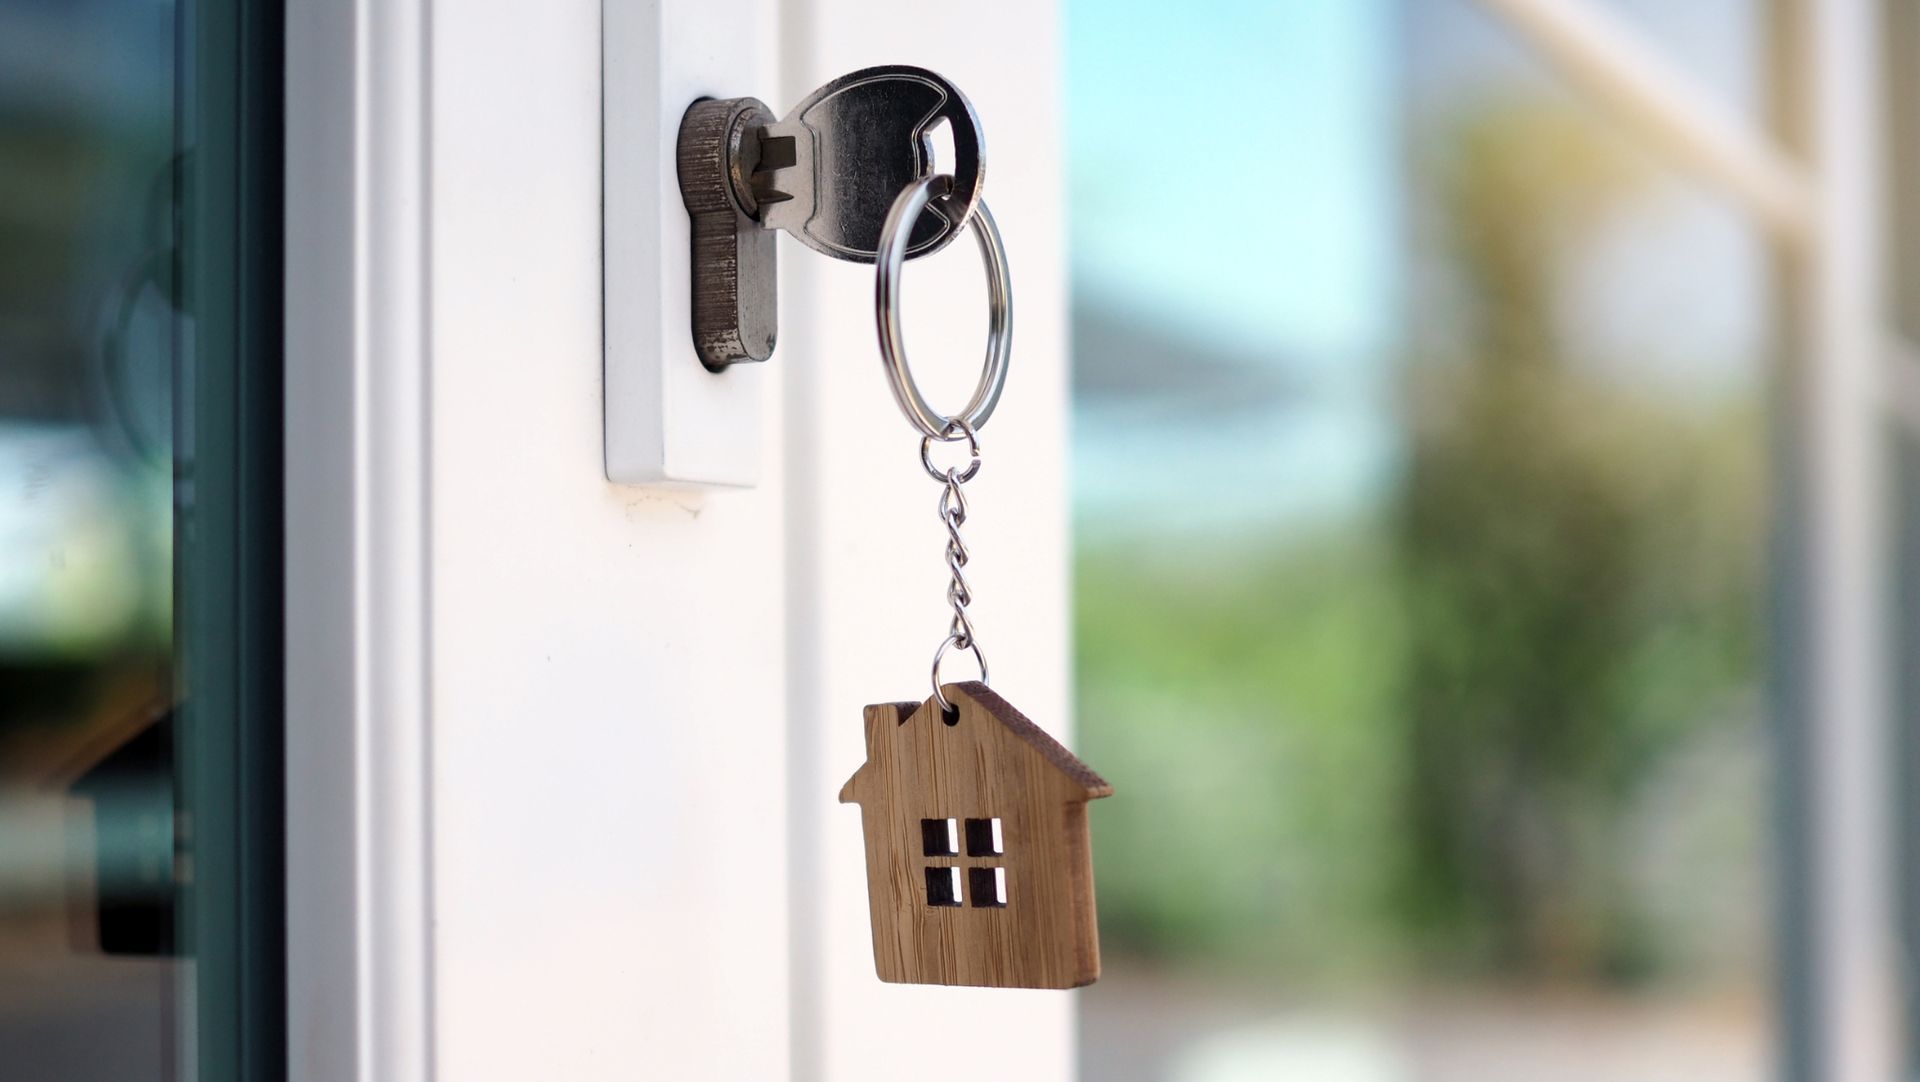 A key with a house-shaped keychain inserted into a door lock, symbolizing home ownership or security.